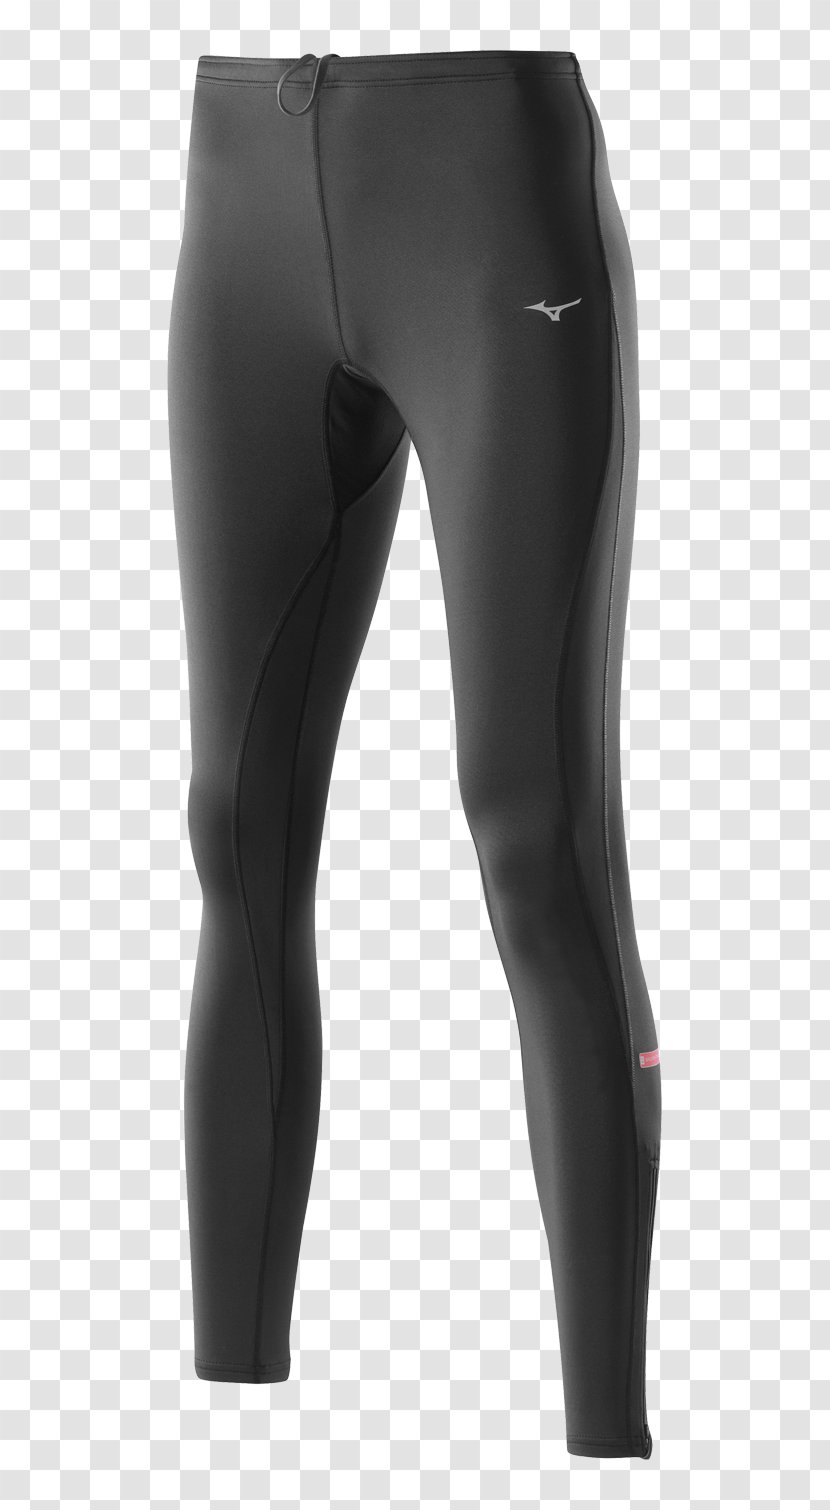 Leggings Waist Product Design Knee - Wetsuit - Zoot Running Shoes For Women Transparent PNG